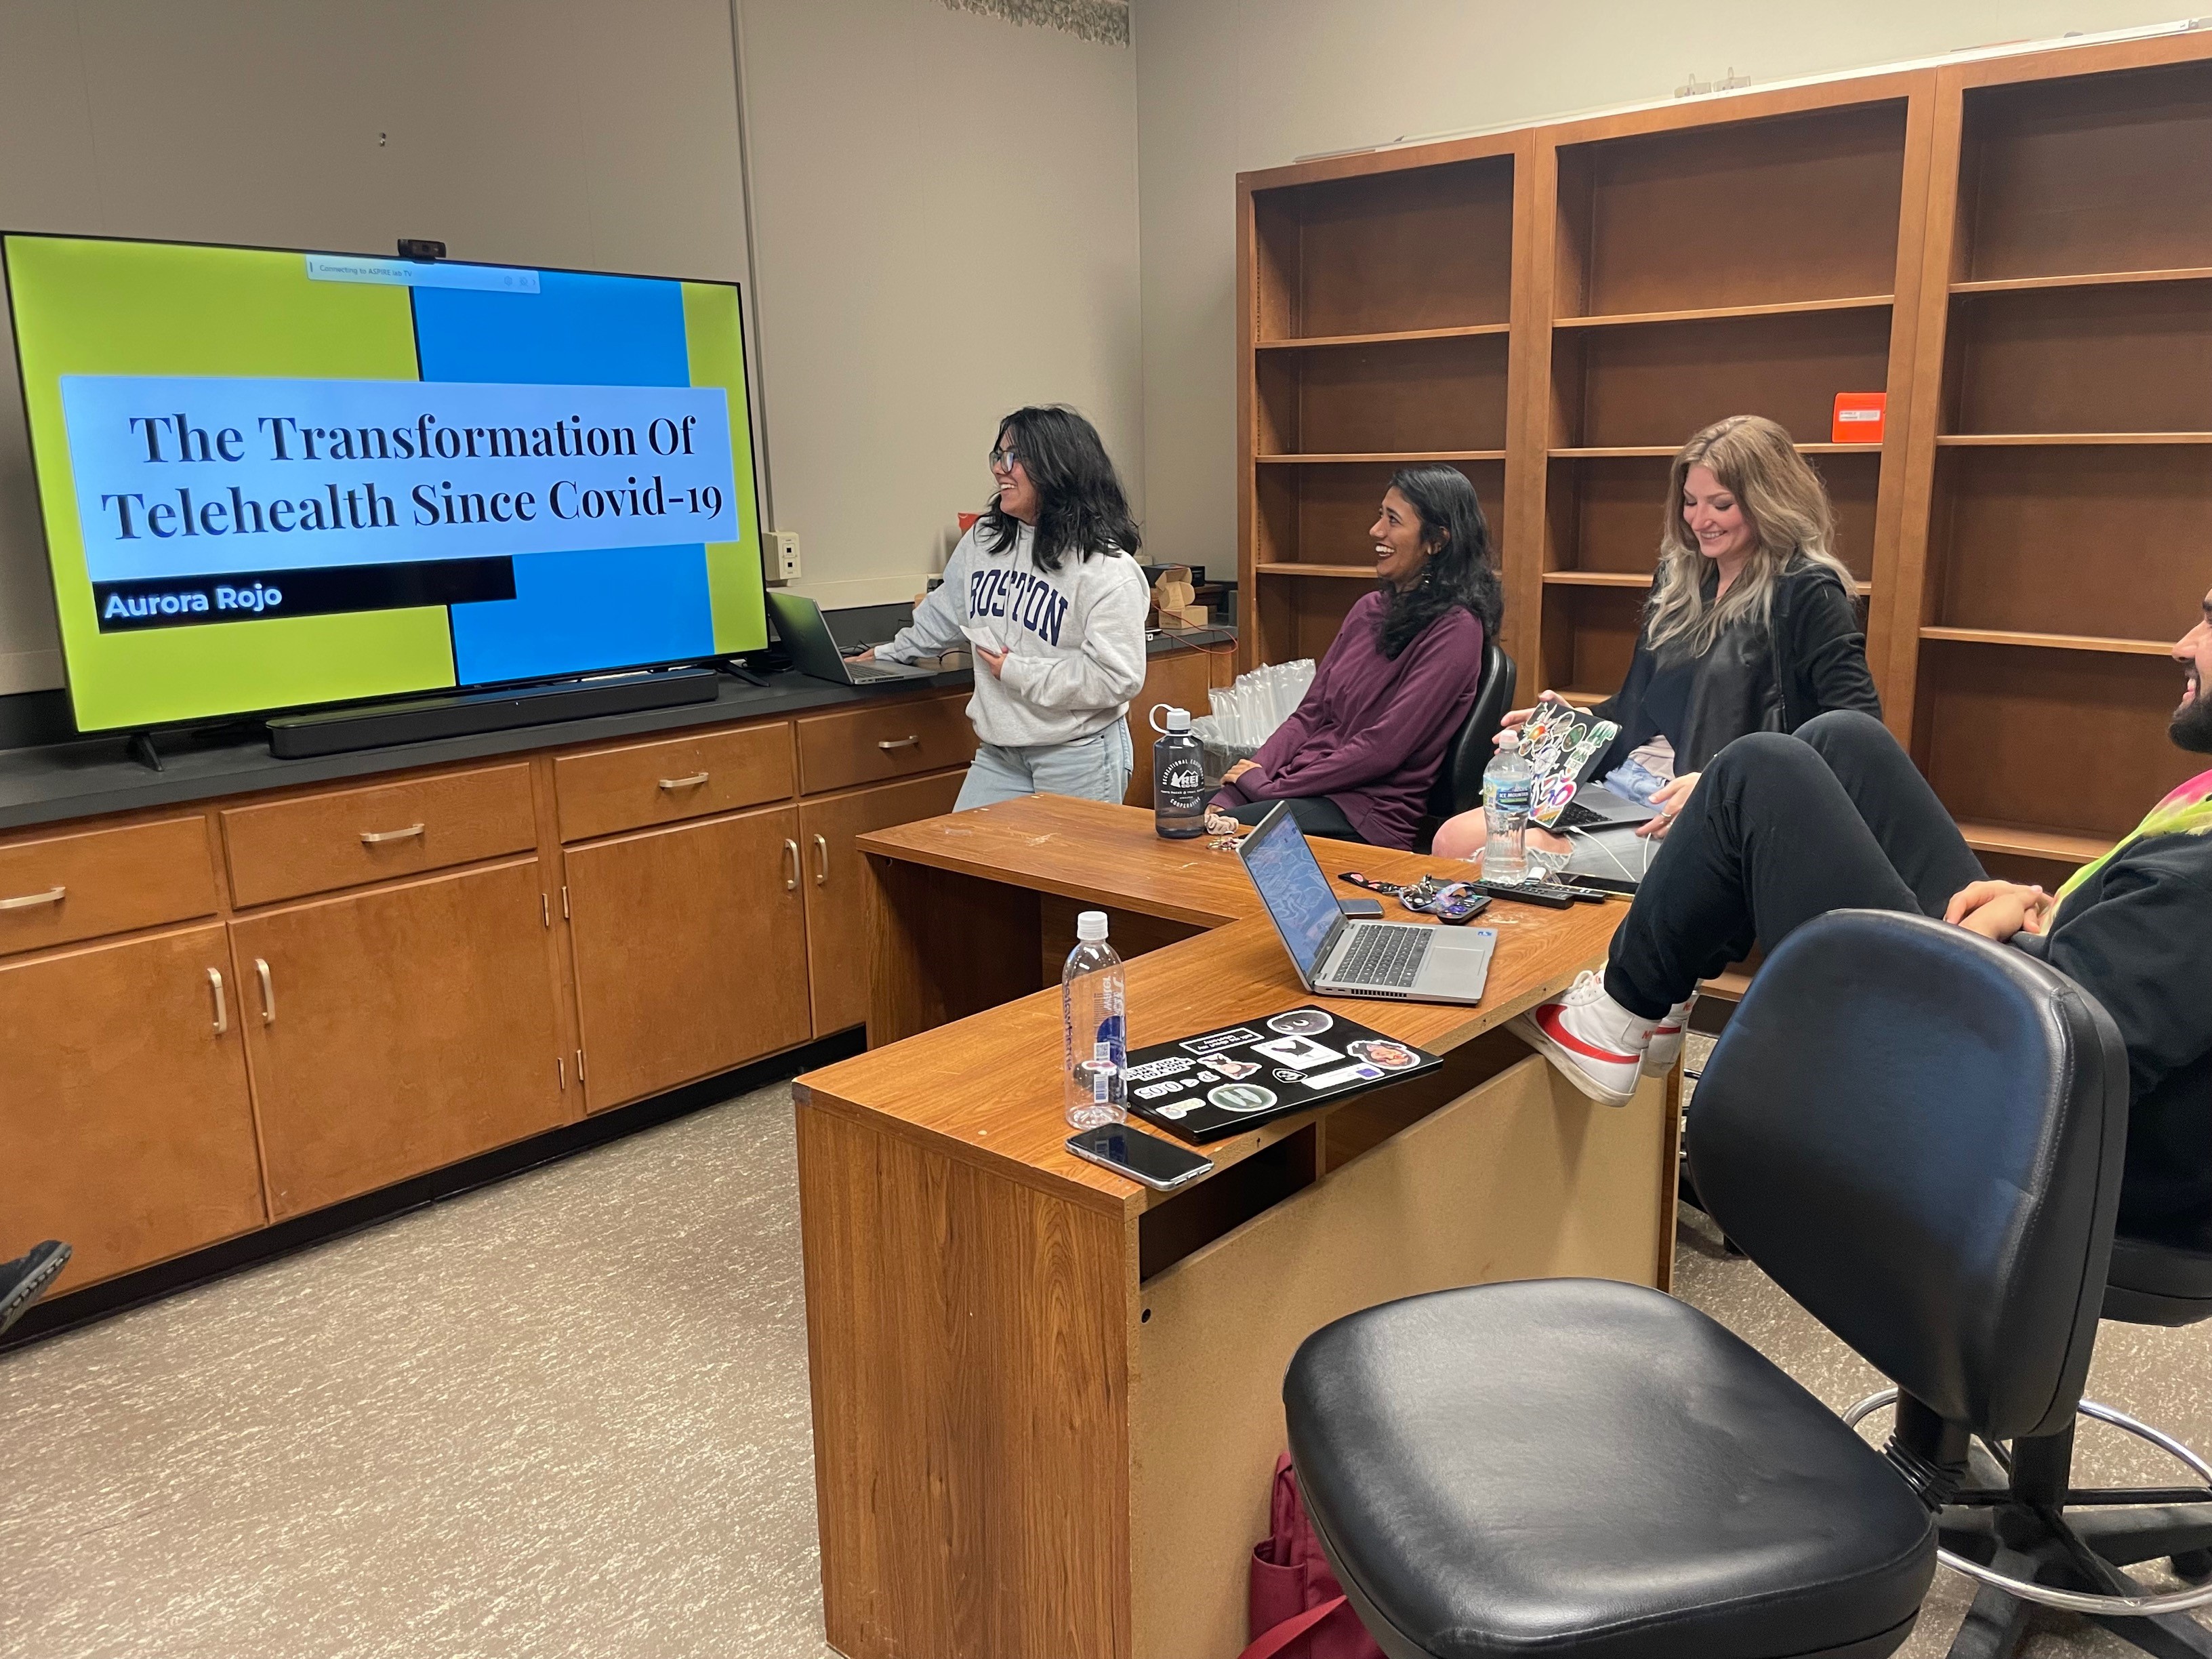 The ASPIRE Lab had its final meeting of the semester where some our lovely members presented their research proposals and used the new tech we have set up!